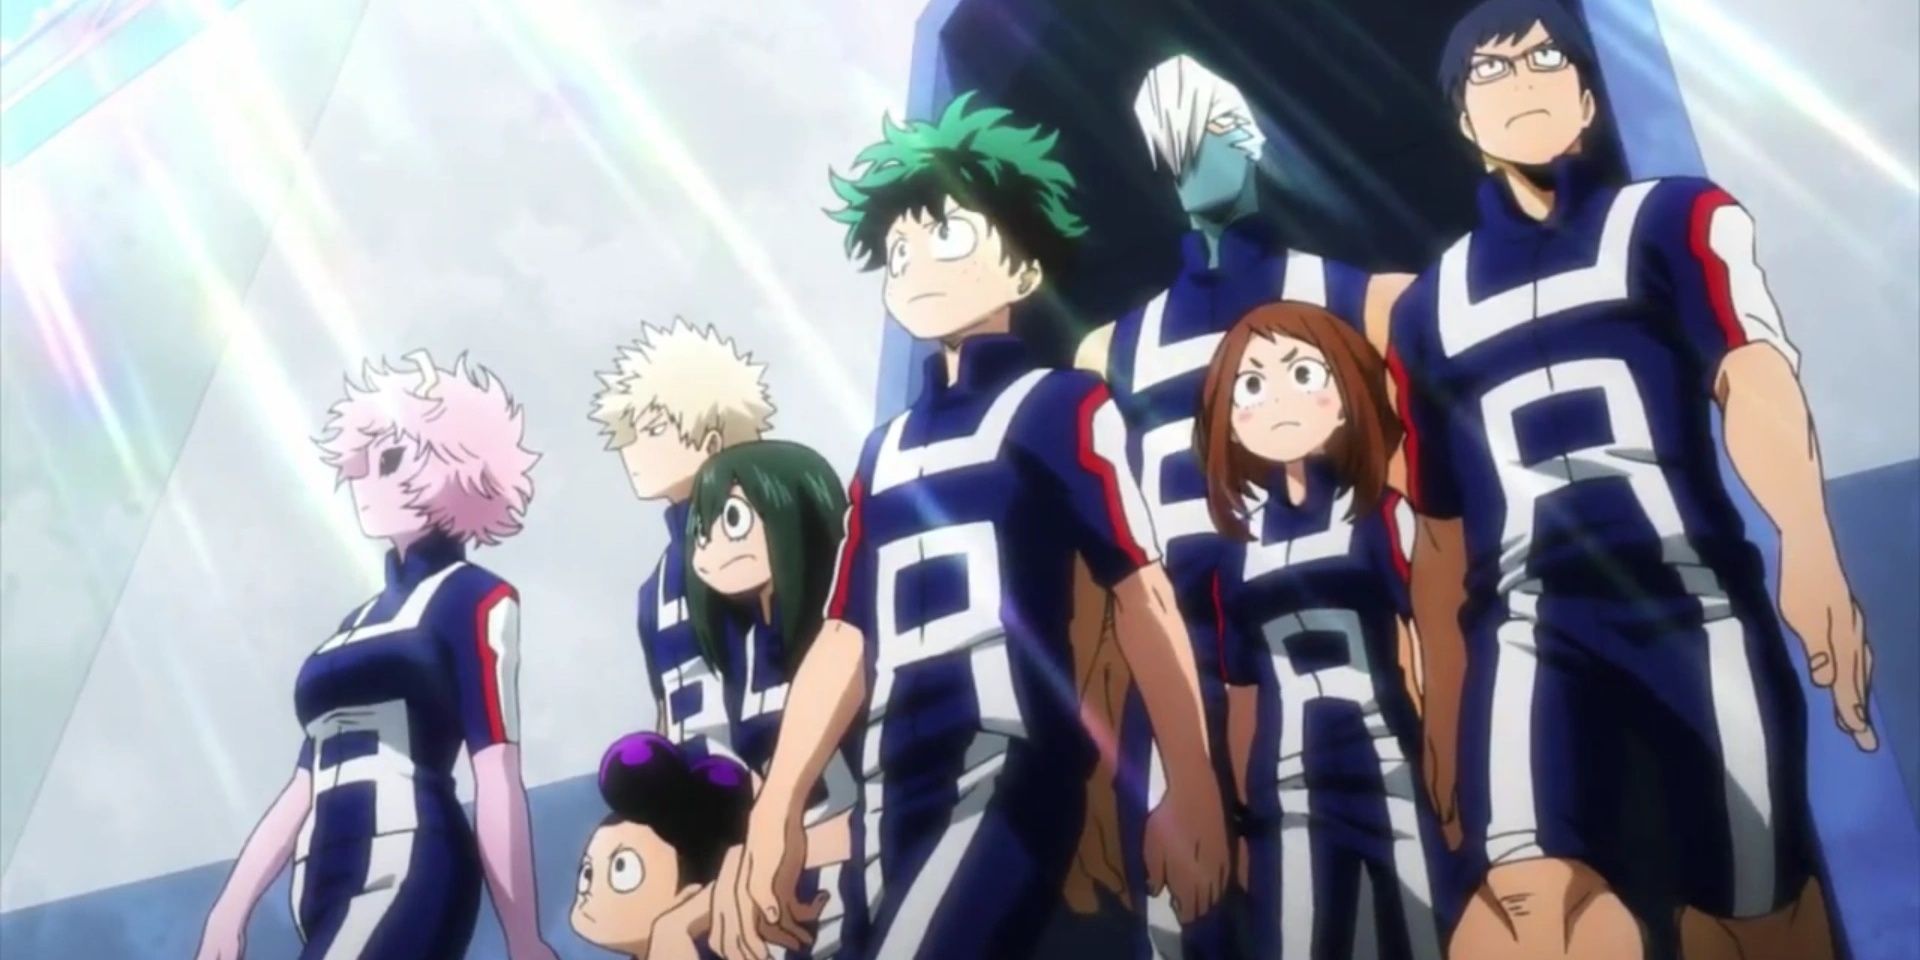 Class 1A from My Hero Academia